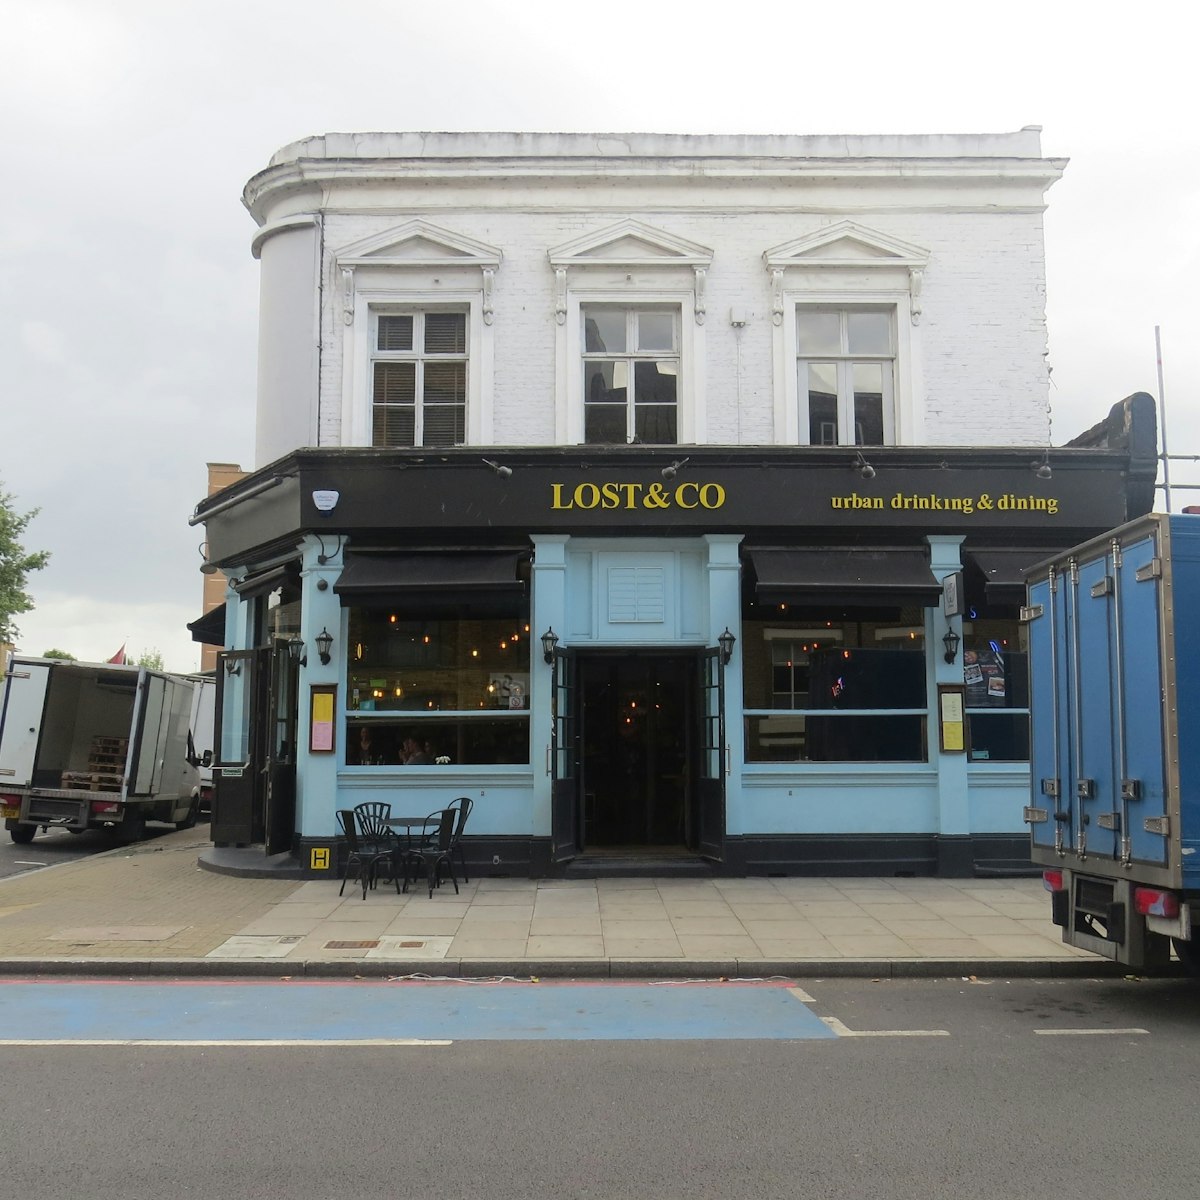 The facade of Lost&Co in Battersea